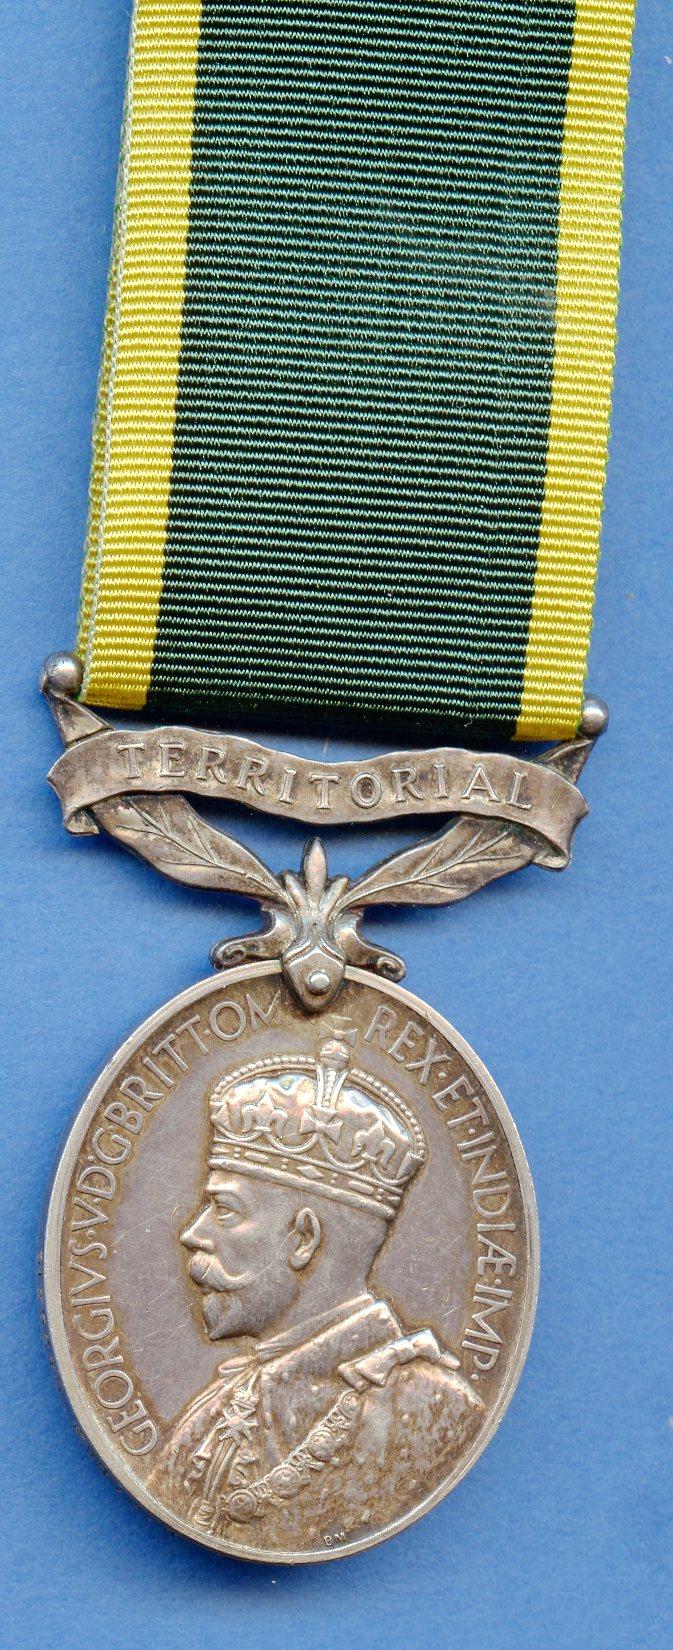 Territorial Efficiency Medal : Fusilier J. W. Henderson, 4-5  Royal Scots Fusiliers